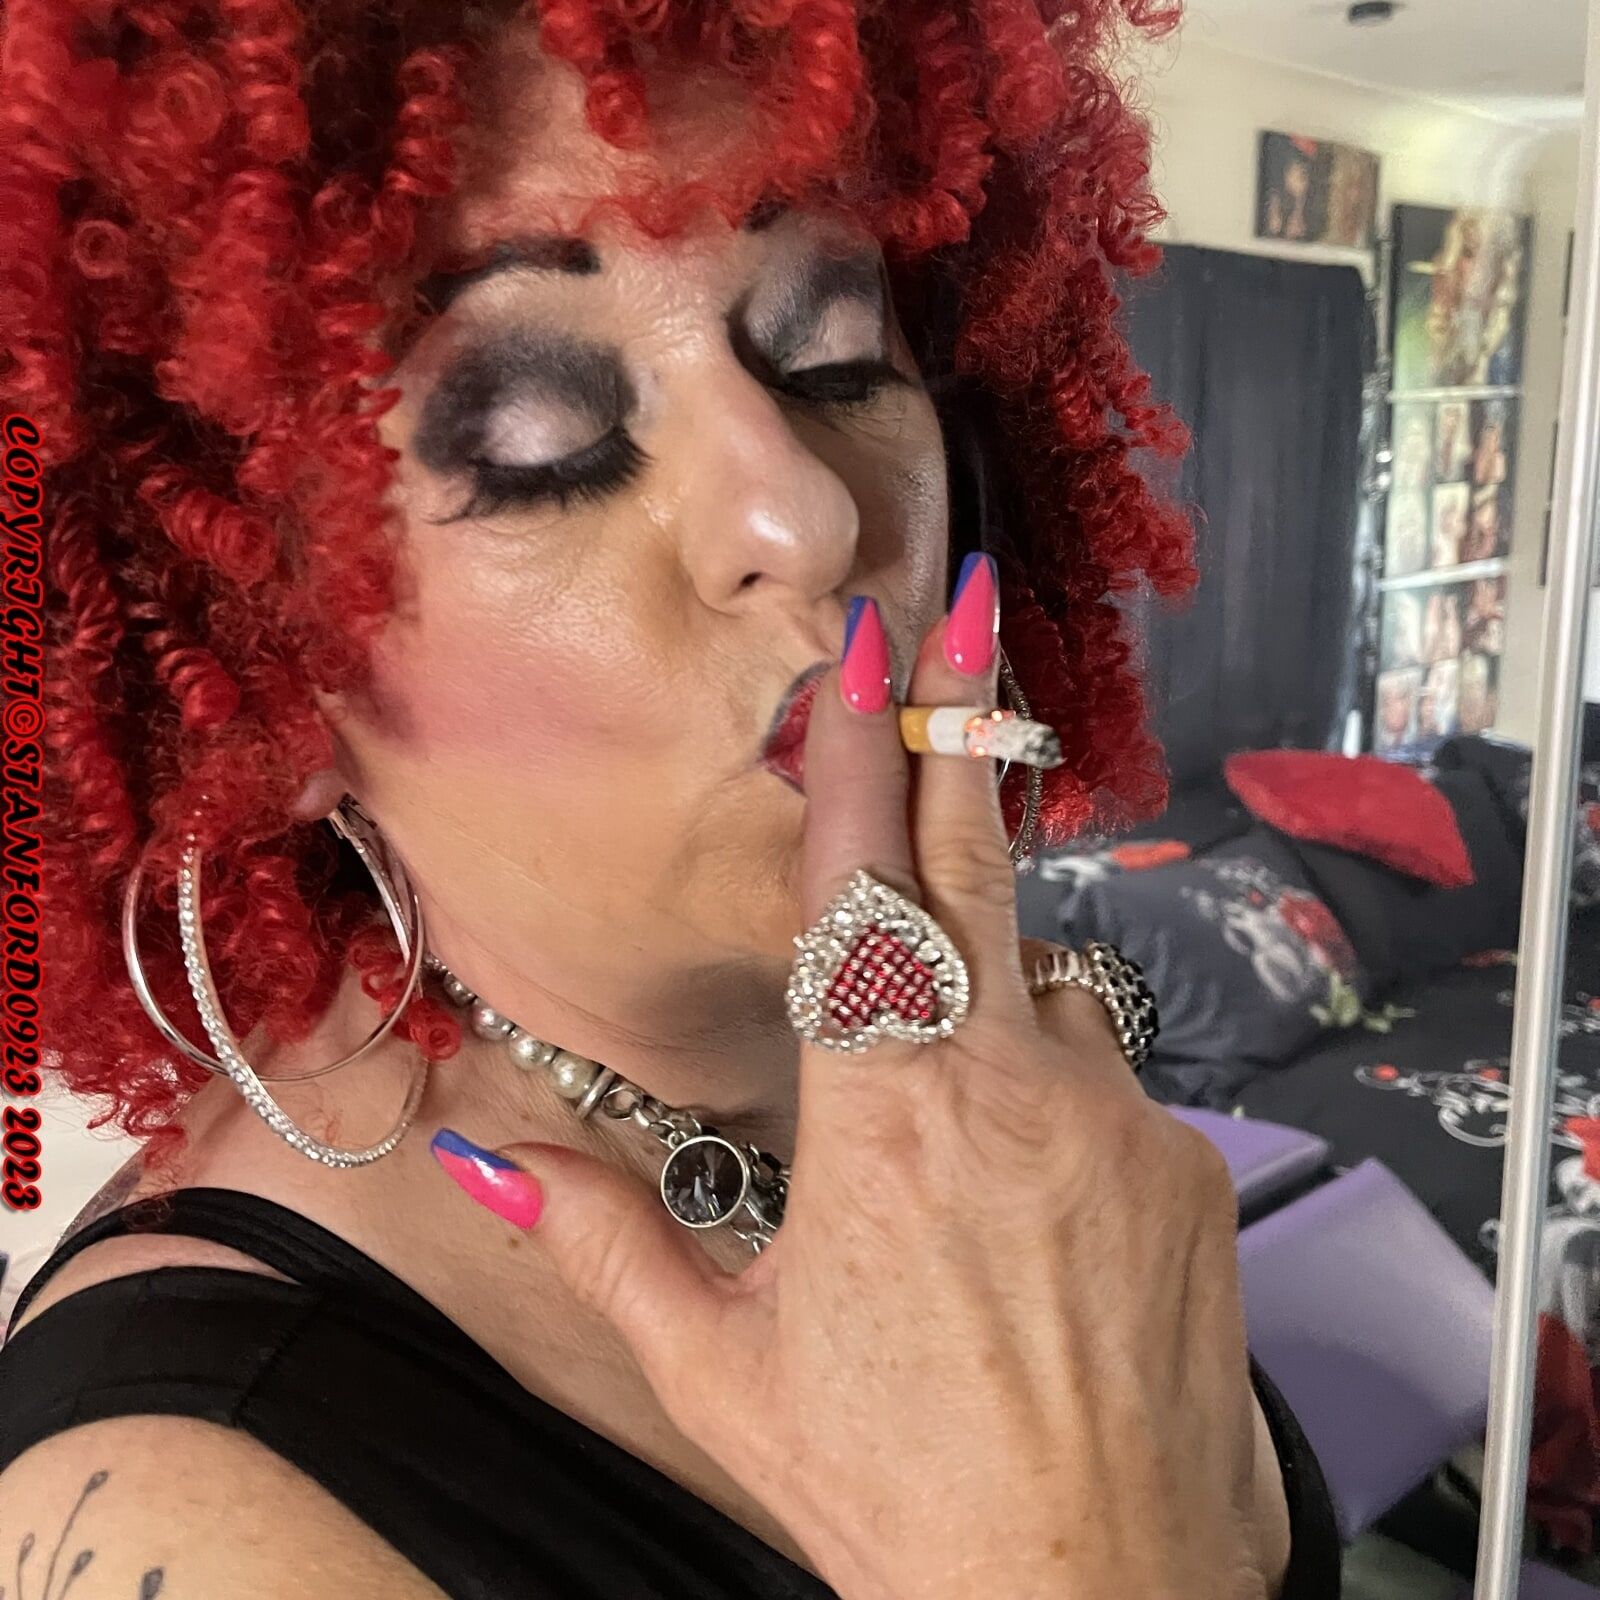 RED WHORE SHIRLEY #37